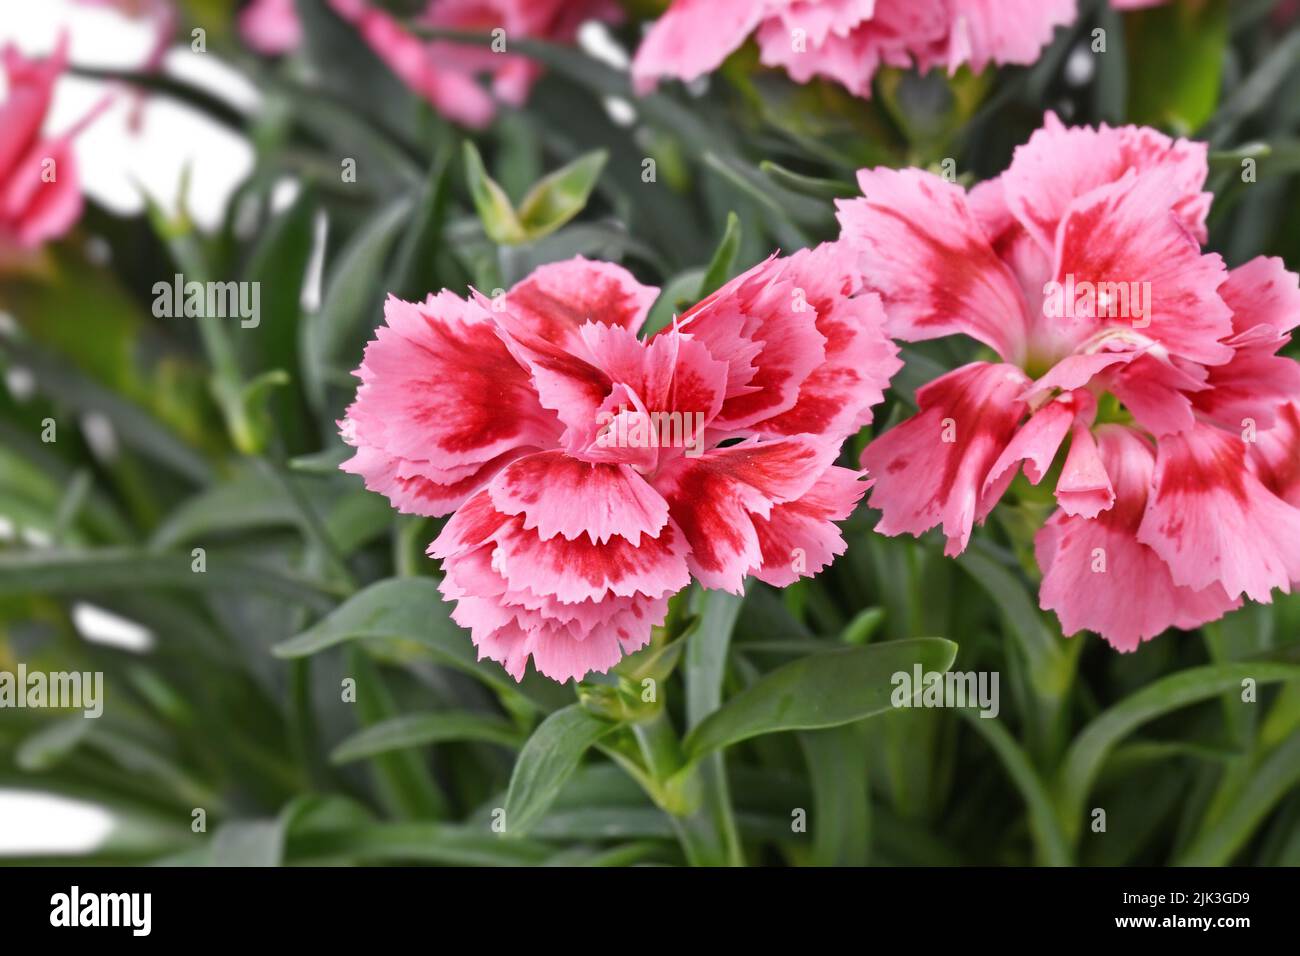 Flower of pink Dianthus plant Stock Photo